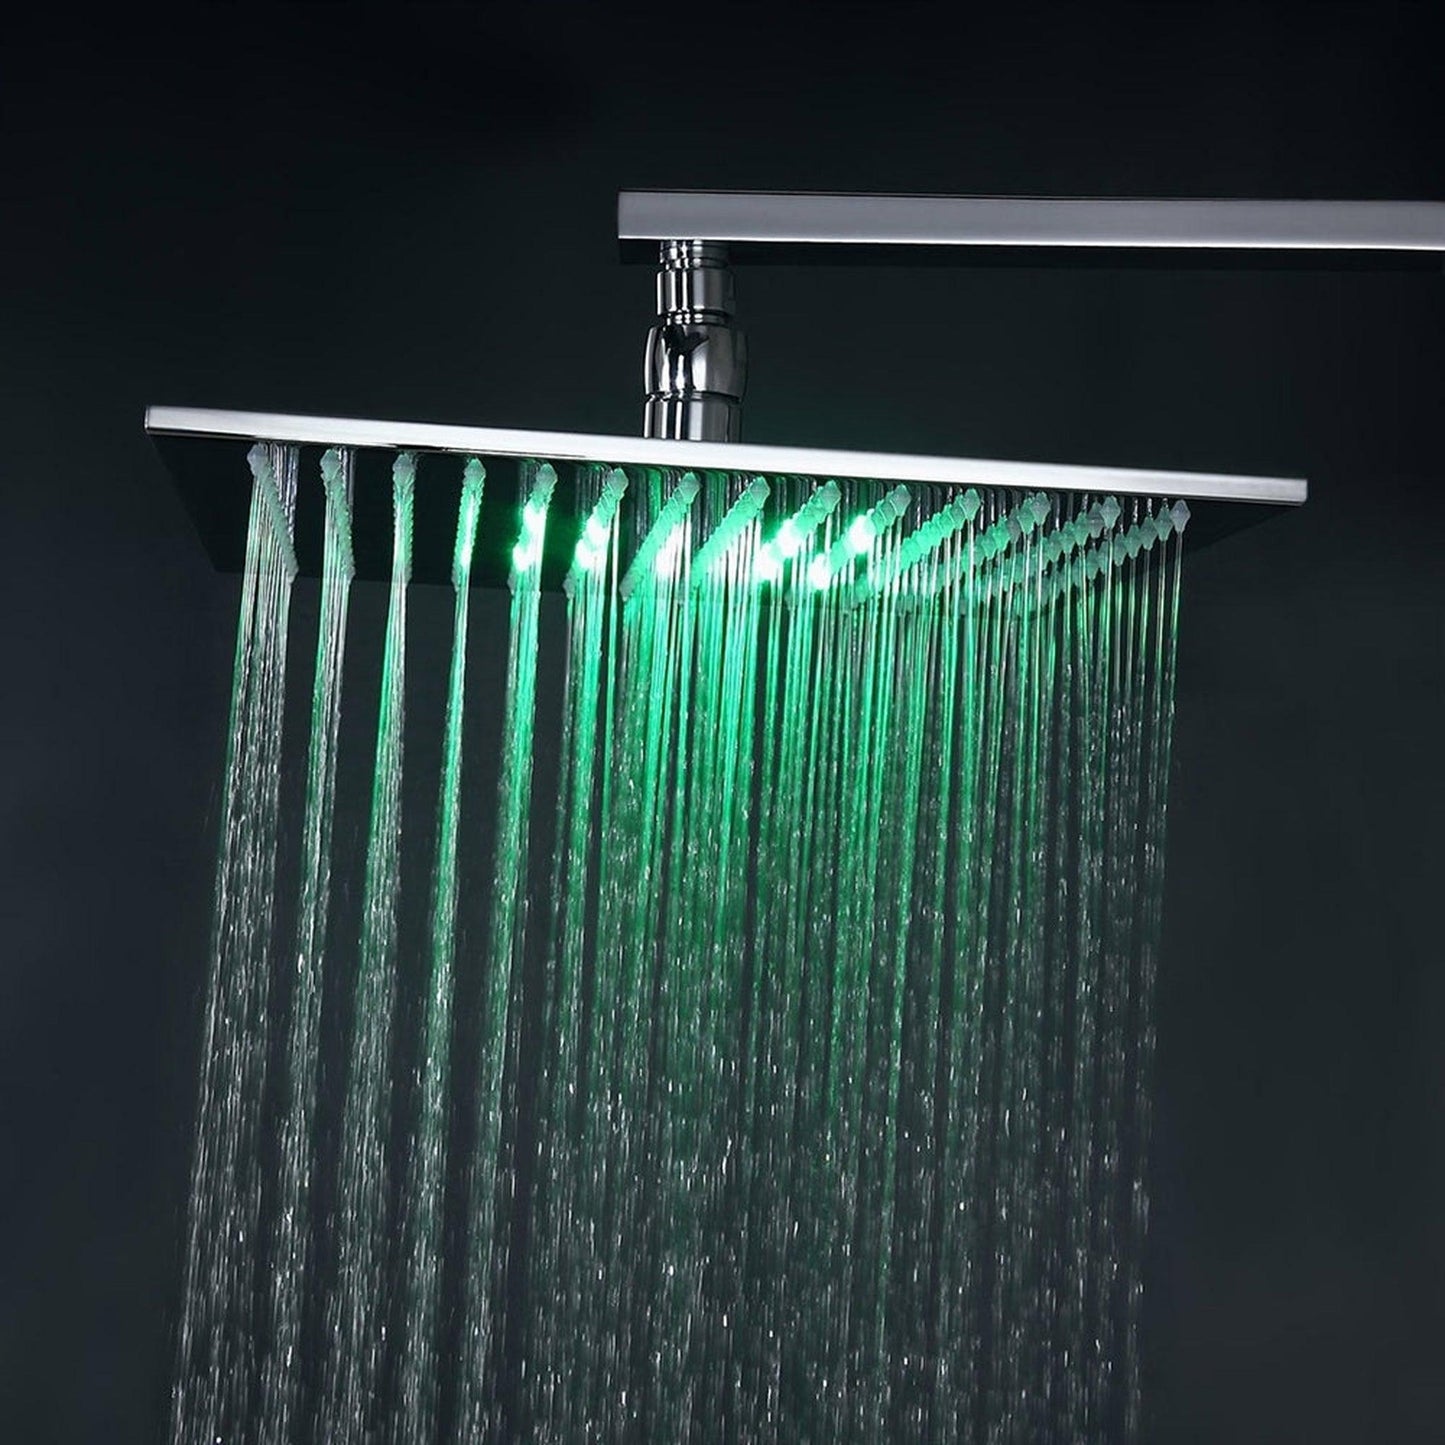 Fontana Trialo 8" Polished Chrome Square Wall-Mounted Color Changing LED Shower System With Thermostatic Mixer, Adjustable 6-Body Jets and Hand Shower